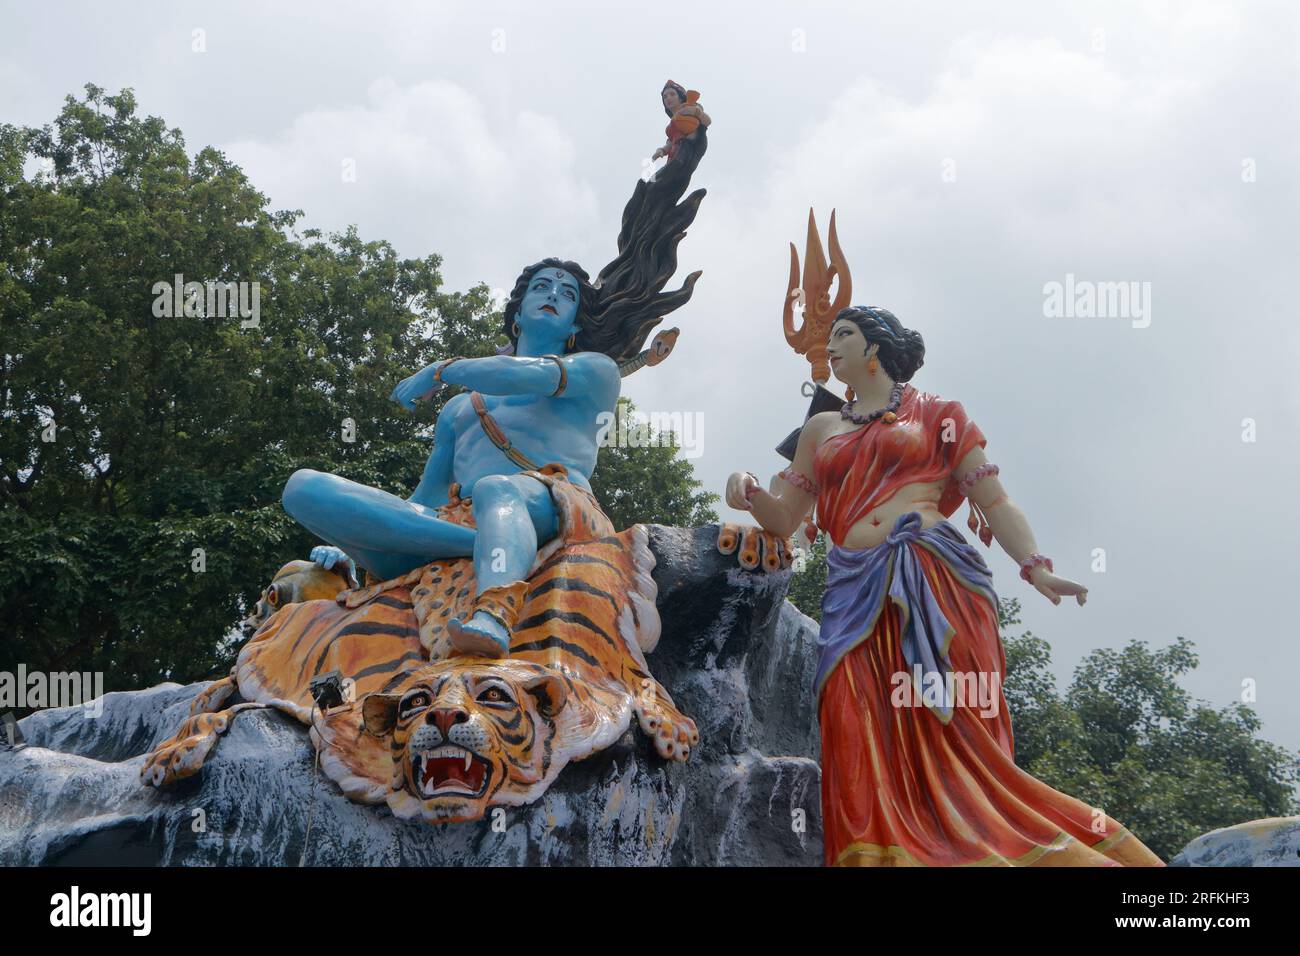 Giant statue of Lord Shiva and Parvati at Triveni Ghat, Rishikesh, with Lord Shiva sitting on the back of a tiger and Goddess Ganga. Stock Photo